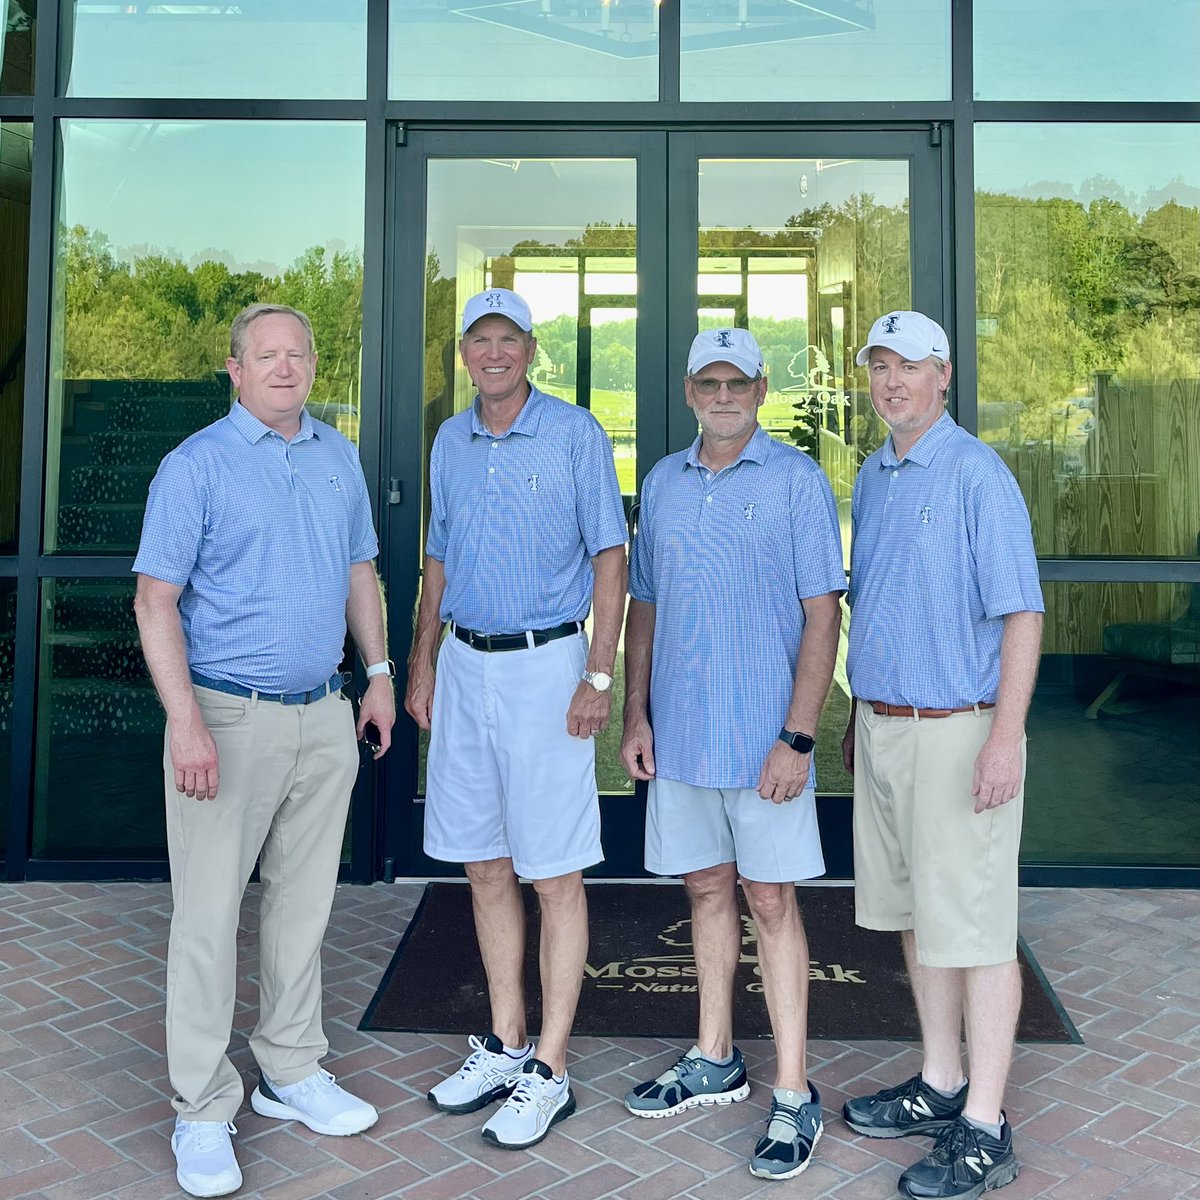 Proud to have Mike Whitehurst from @CocaCola/@CorinthCocaCola join the @ItawambaCC team for today’s Take a Swing at Cancer annual golf tournament hosted by @NMMC_news Healthcare Foundation!